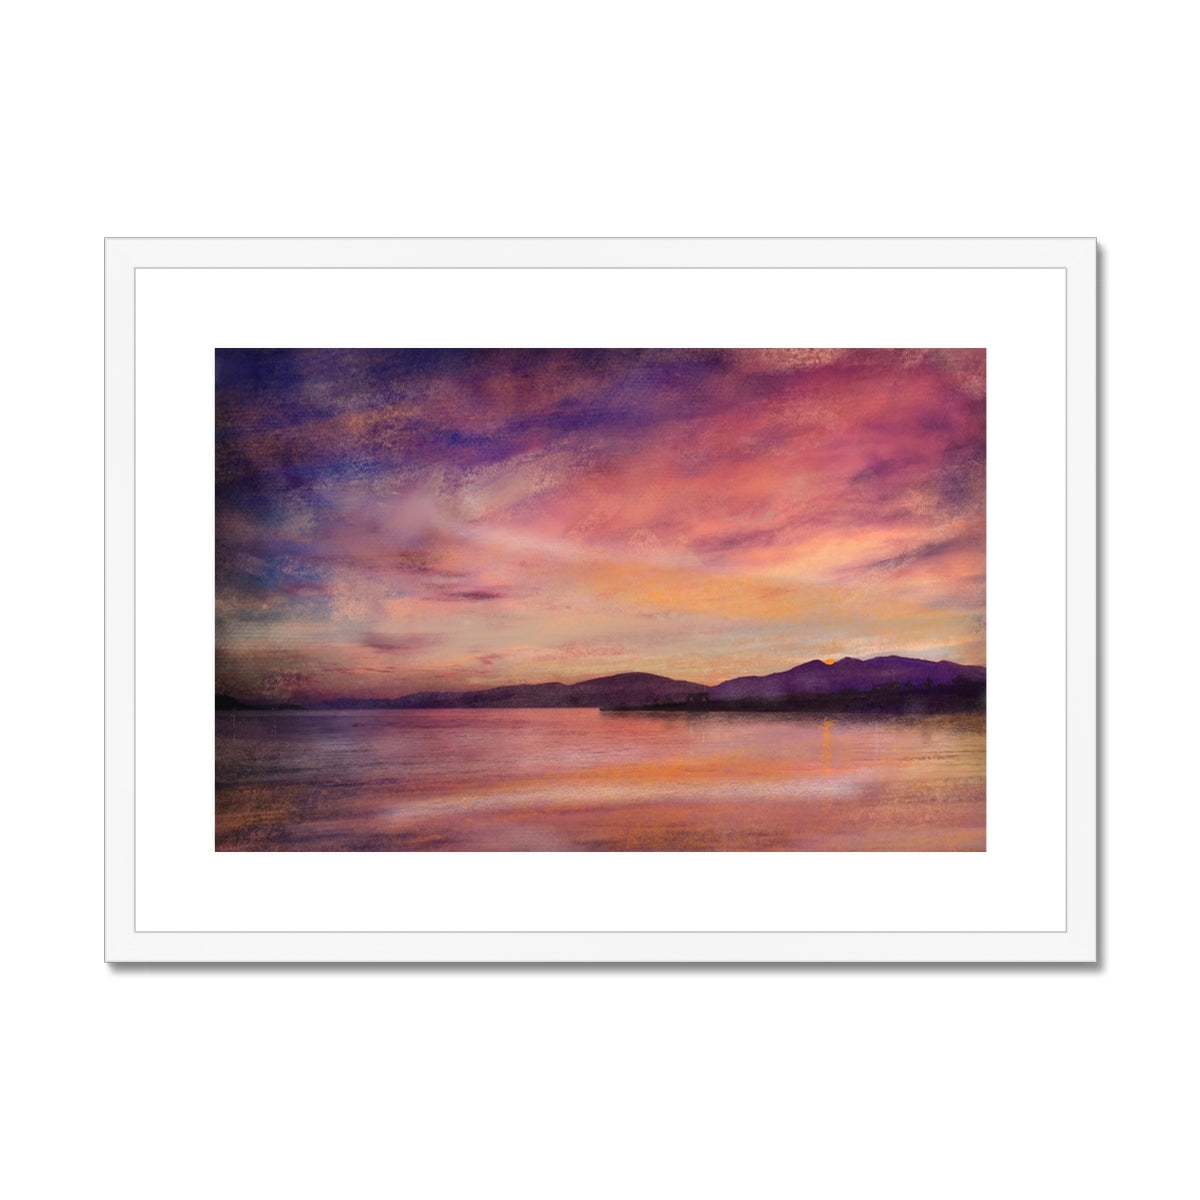 Loch Linnhe Dusk Painting | Framed & Mounted Prints From Scotland-Framed & Mounted Prints-Scottish Lochs & Mountains Art Gallery-A2 Landscape-White Frame-Paintings, Prints, Homeware, Art Gifts From Scotland By Scottish Artist Kevin Hunter